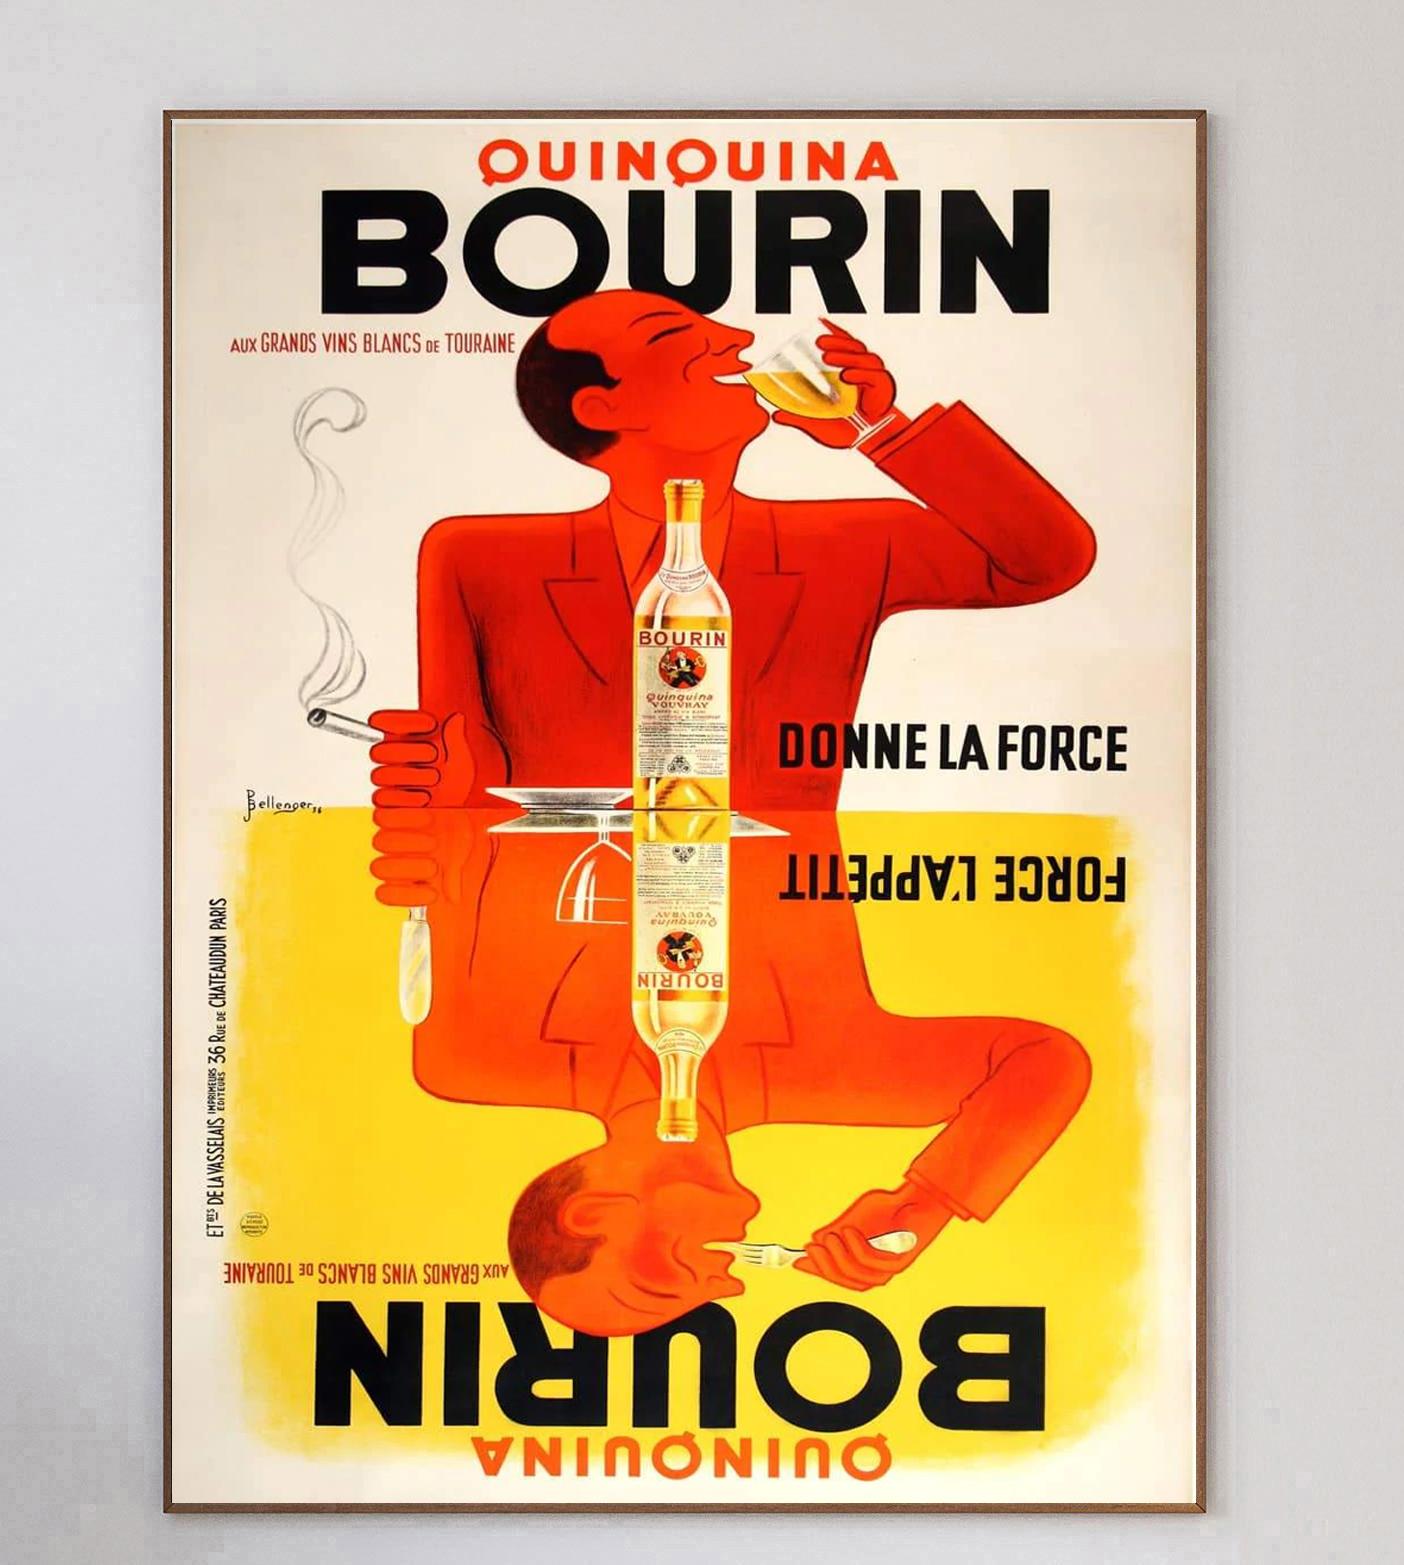 Stunning poster for Bourin Quinquina created in 1936. This beautiful design by Bellenger is mirrored, and so works when hung vertically either way. With vibrant colours depicting a man drinking the liquor and enjoying a cigarette one side, and